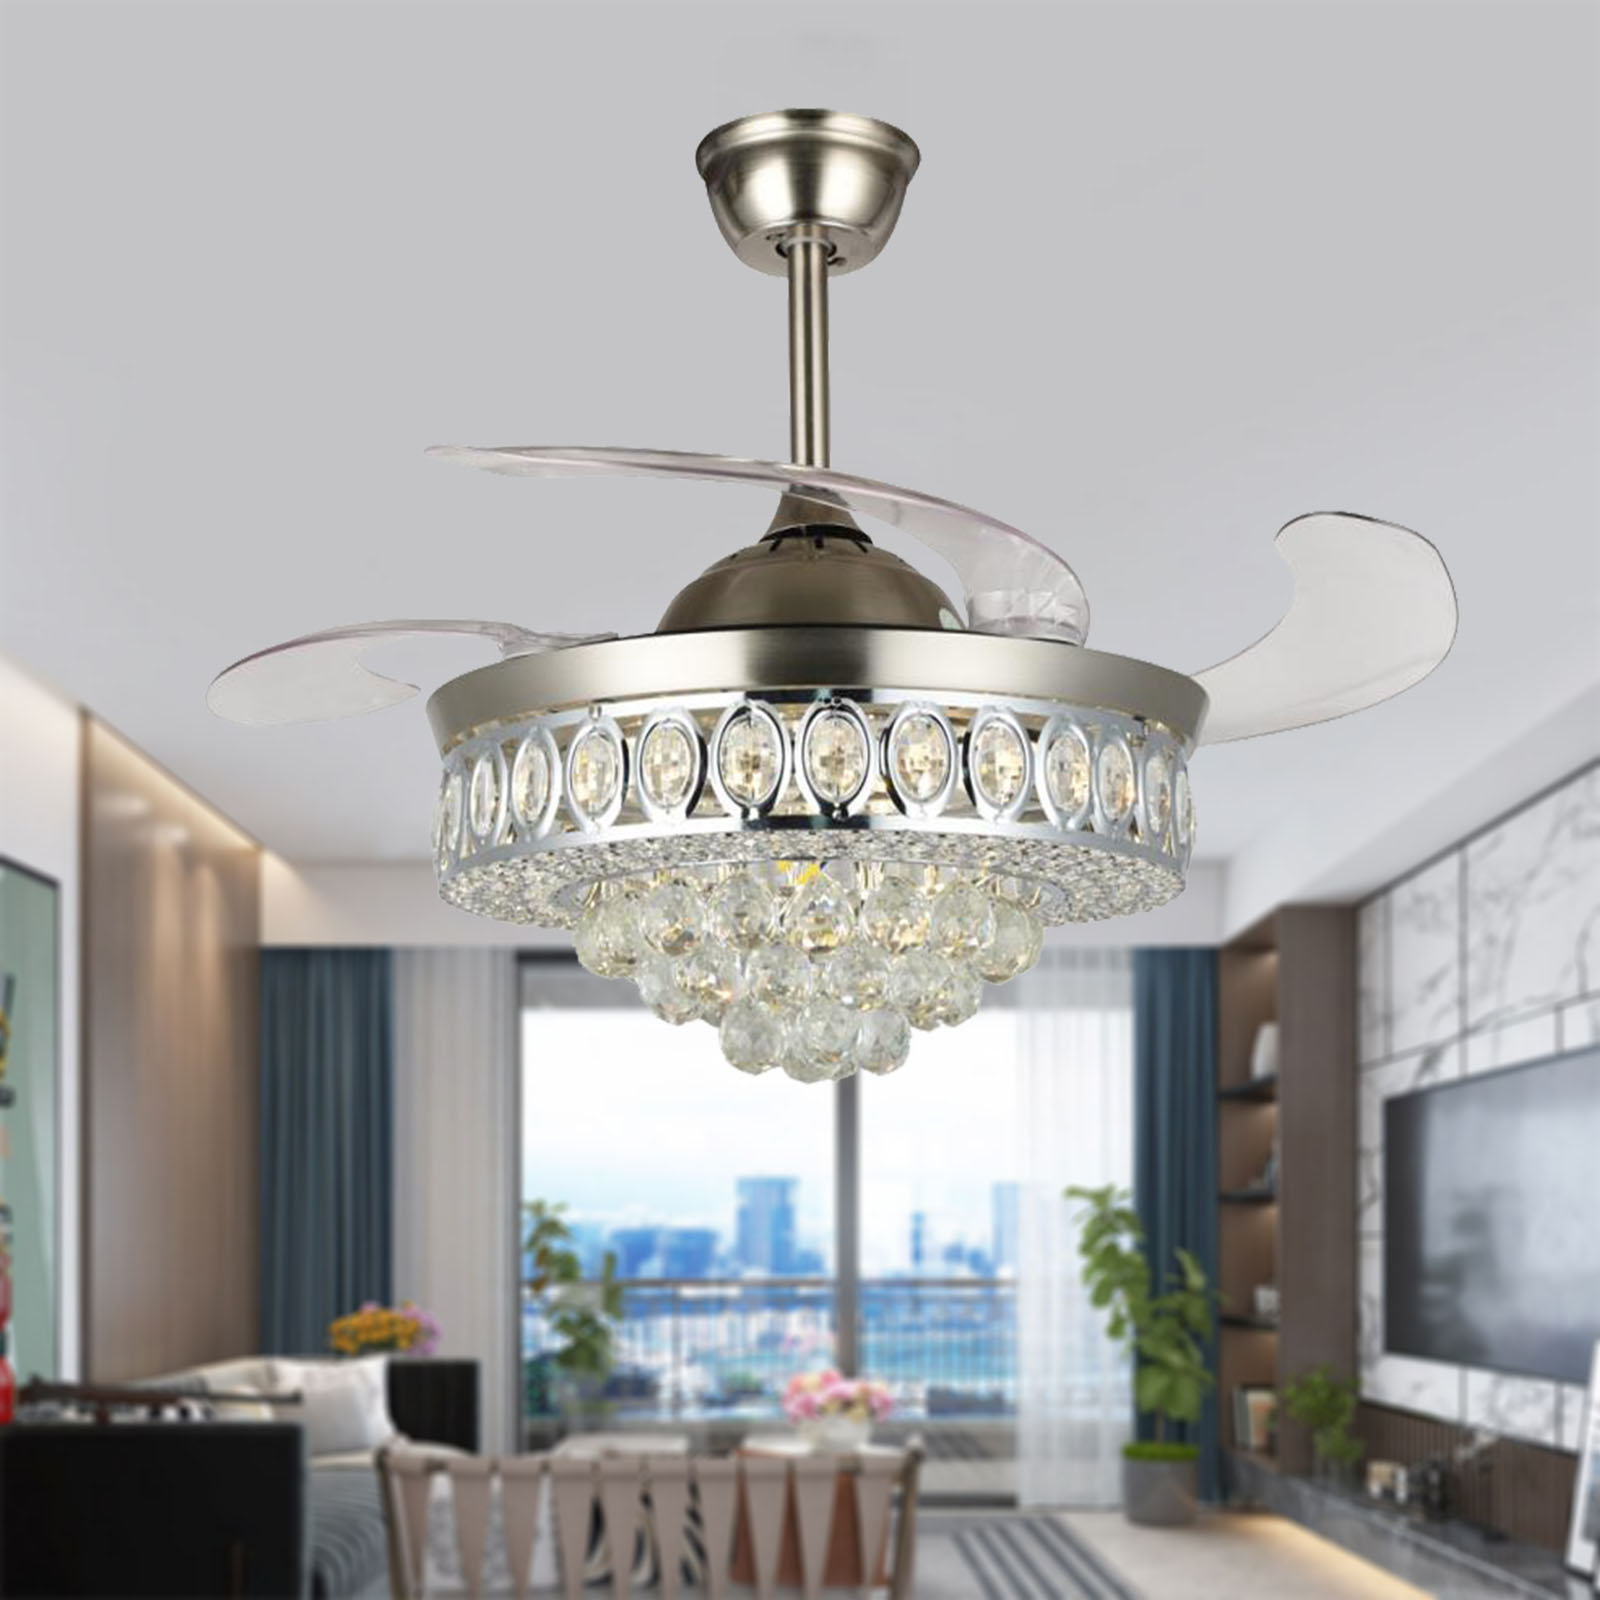 42" Dimmable Ceiling Fan Light Chandelier with LED 4 Retractable Blades w/Remote 